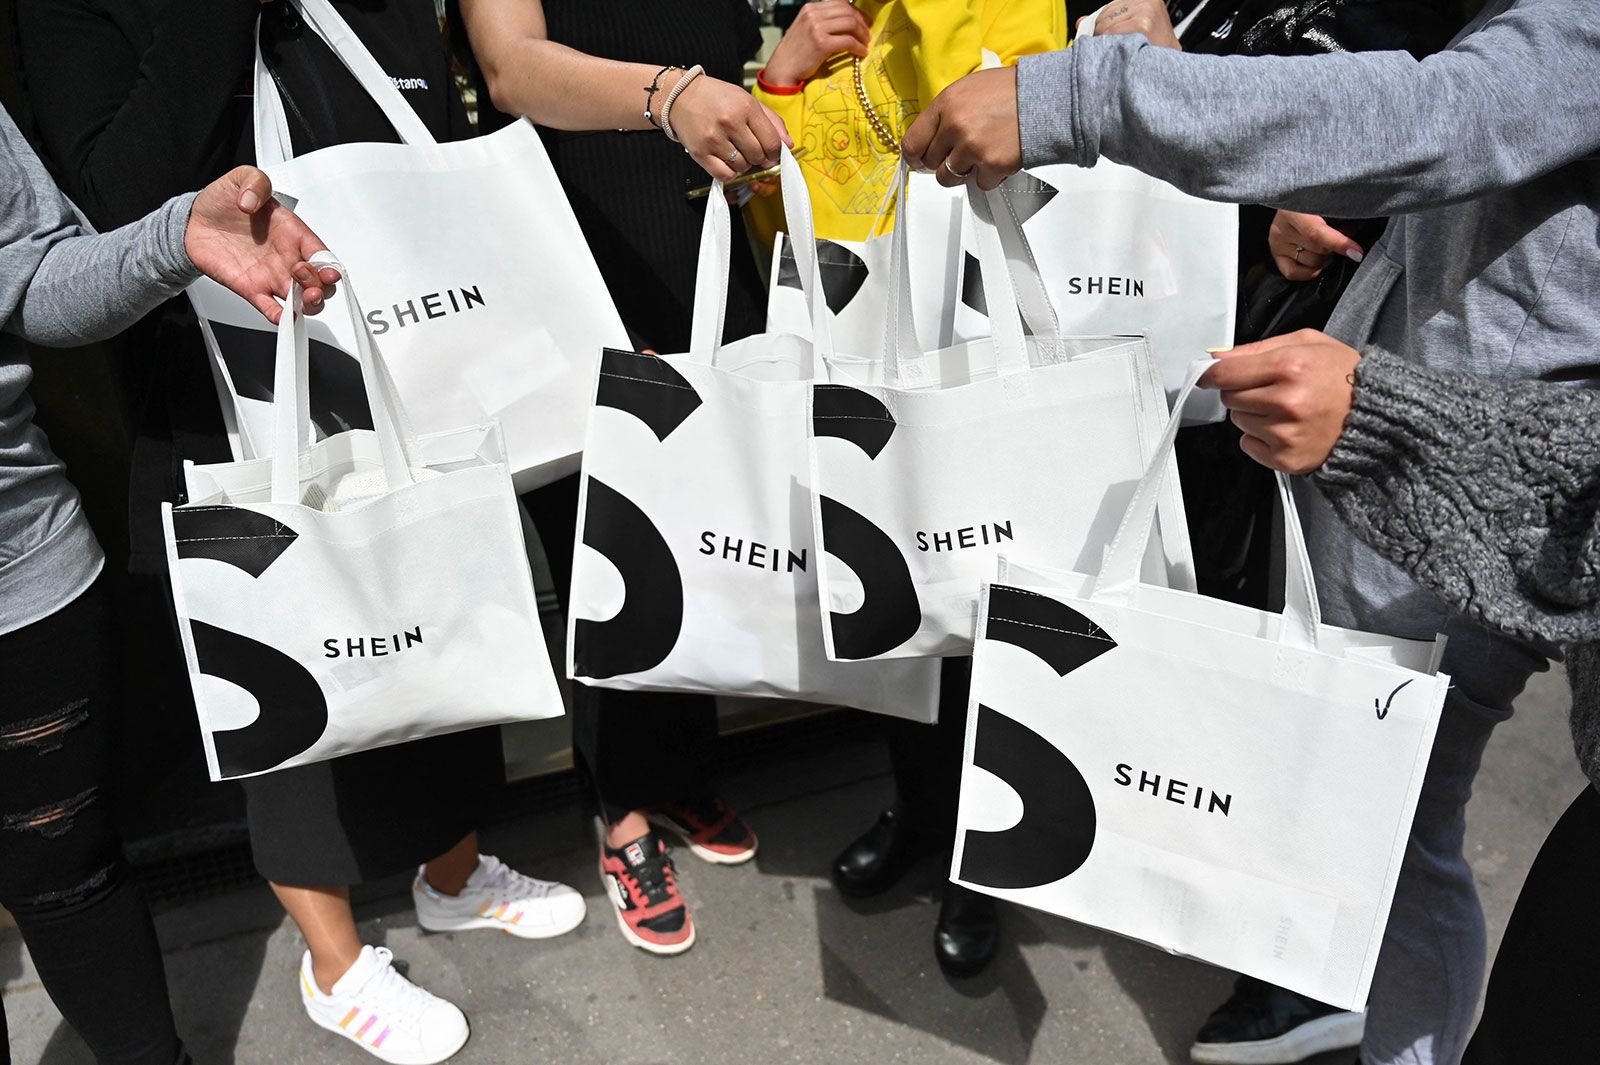 What SHEIN is Doing Wrong: The Importance of Having an Ethical